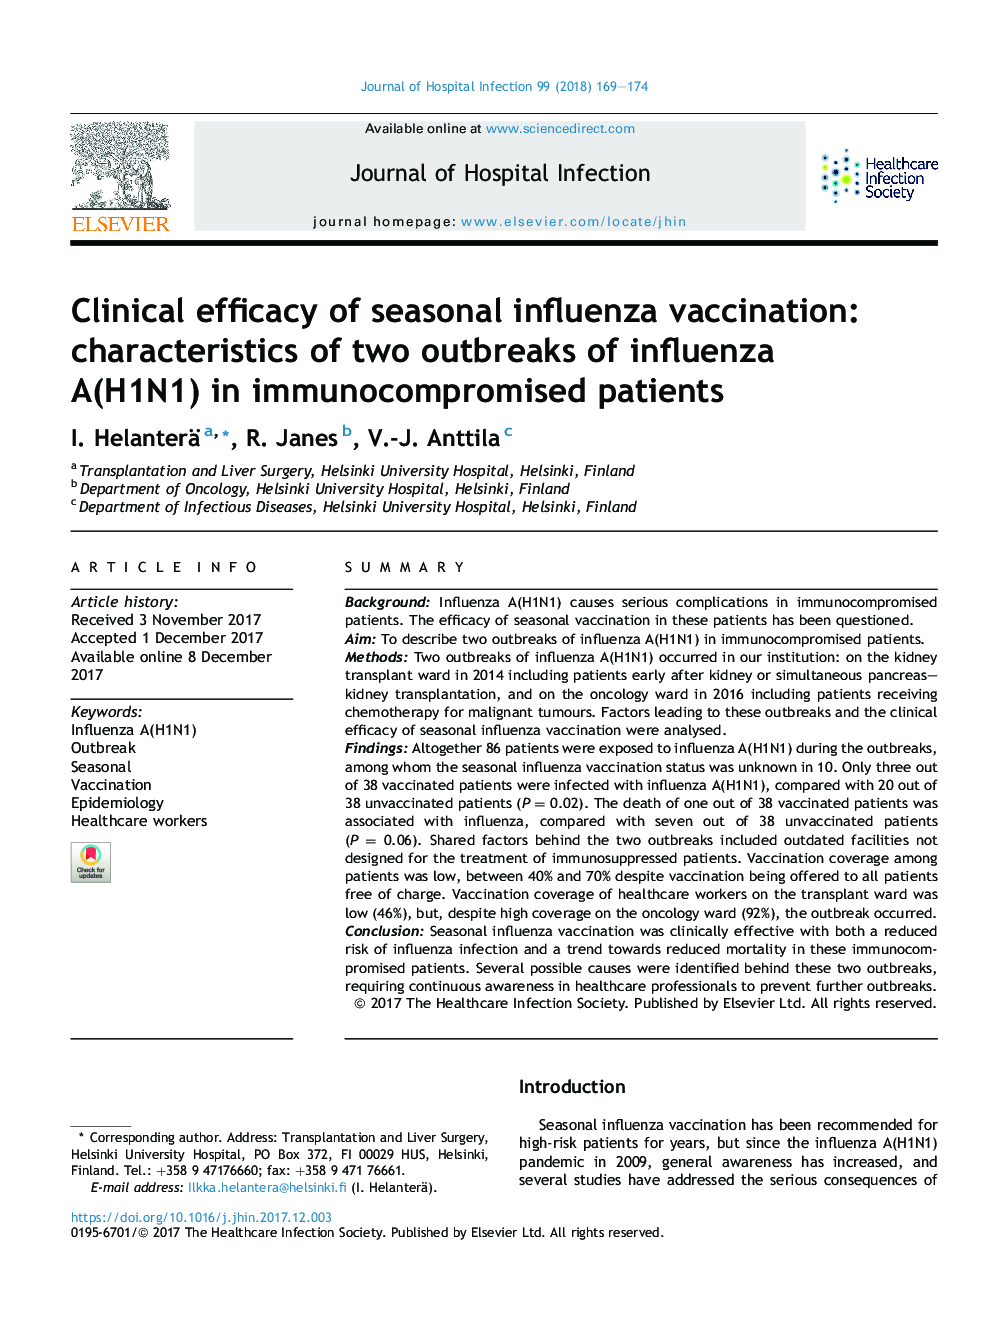 Clinical efficacy of seasonal influenza vaccination: characteristics of two outbreaks of influenza A(H1N1)Â in immunocompromised patients